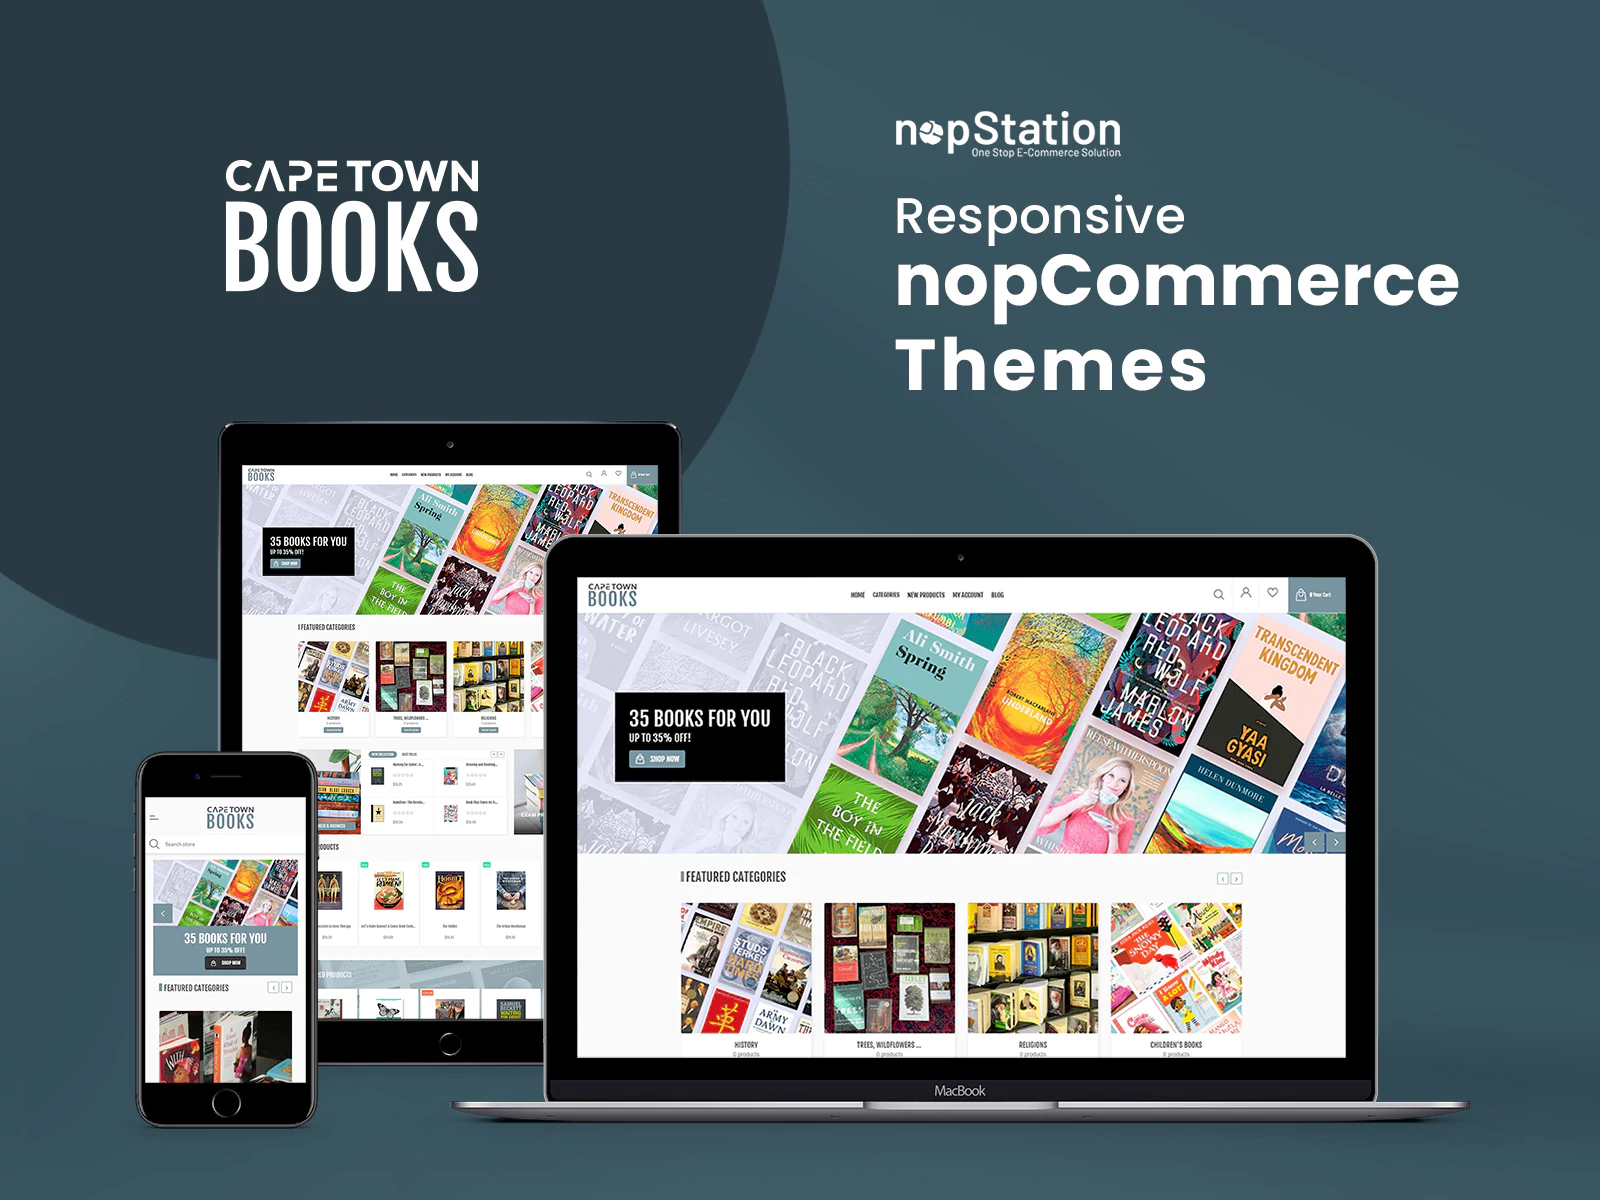 capetown-book theme homepage banner